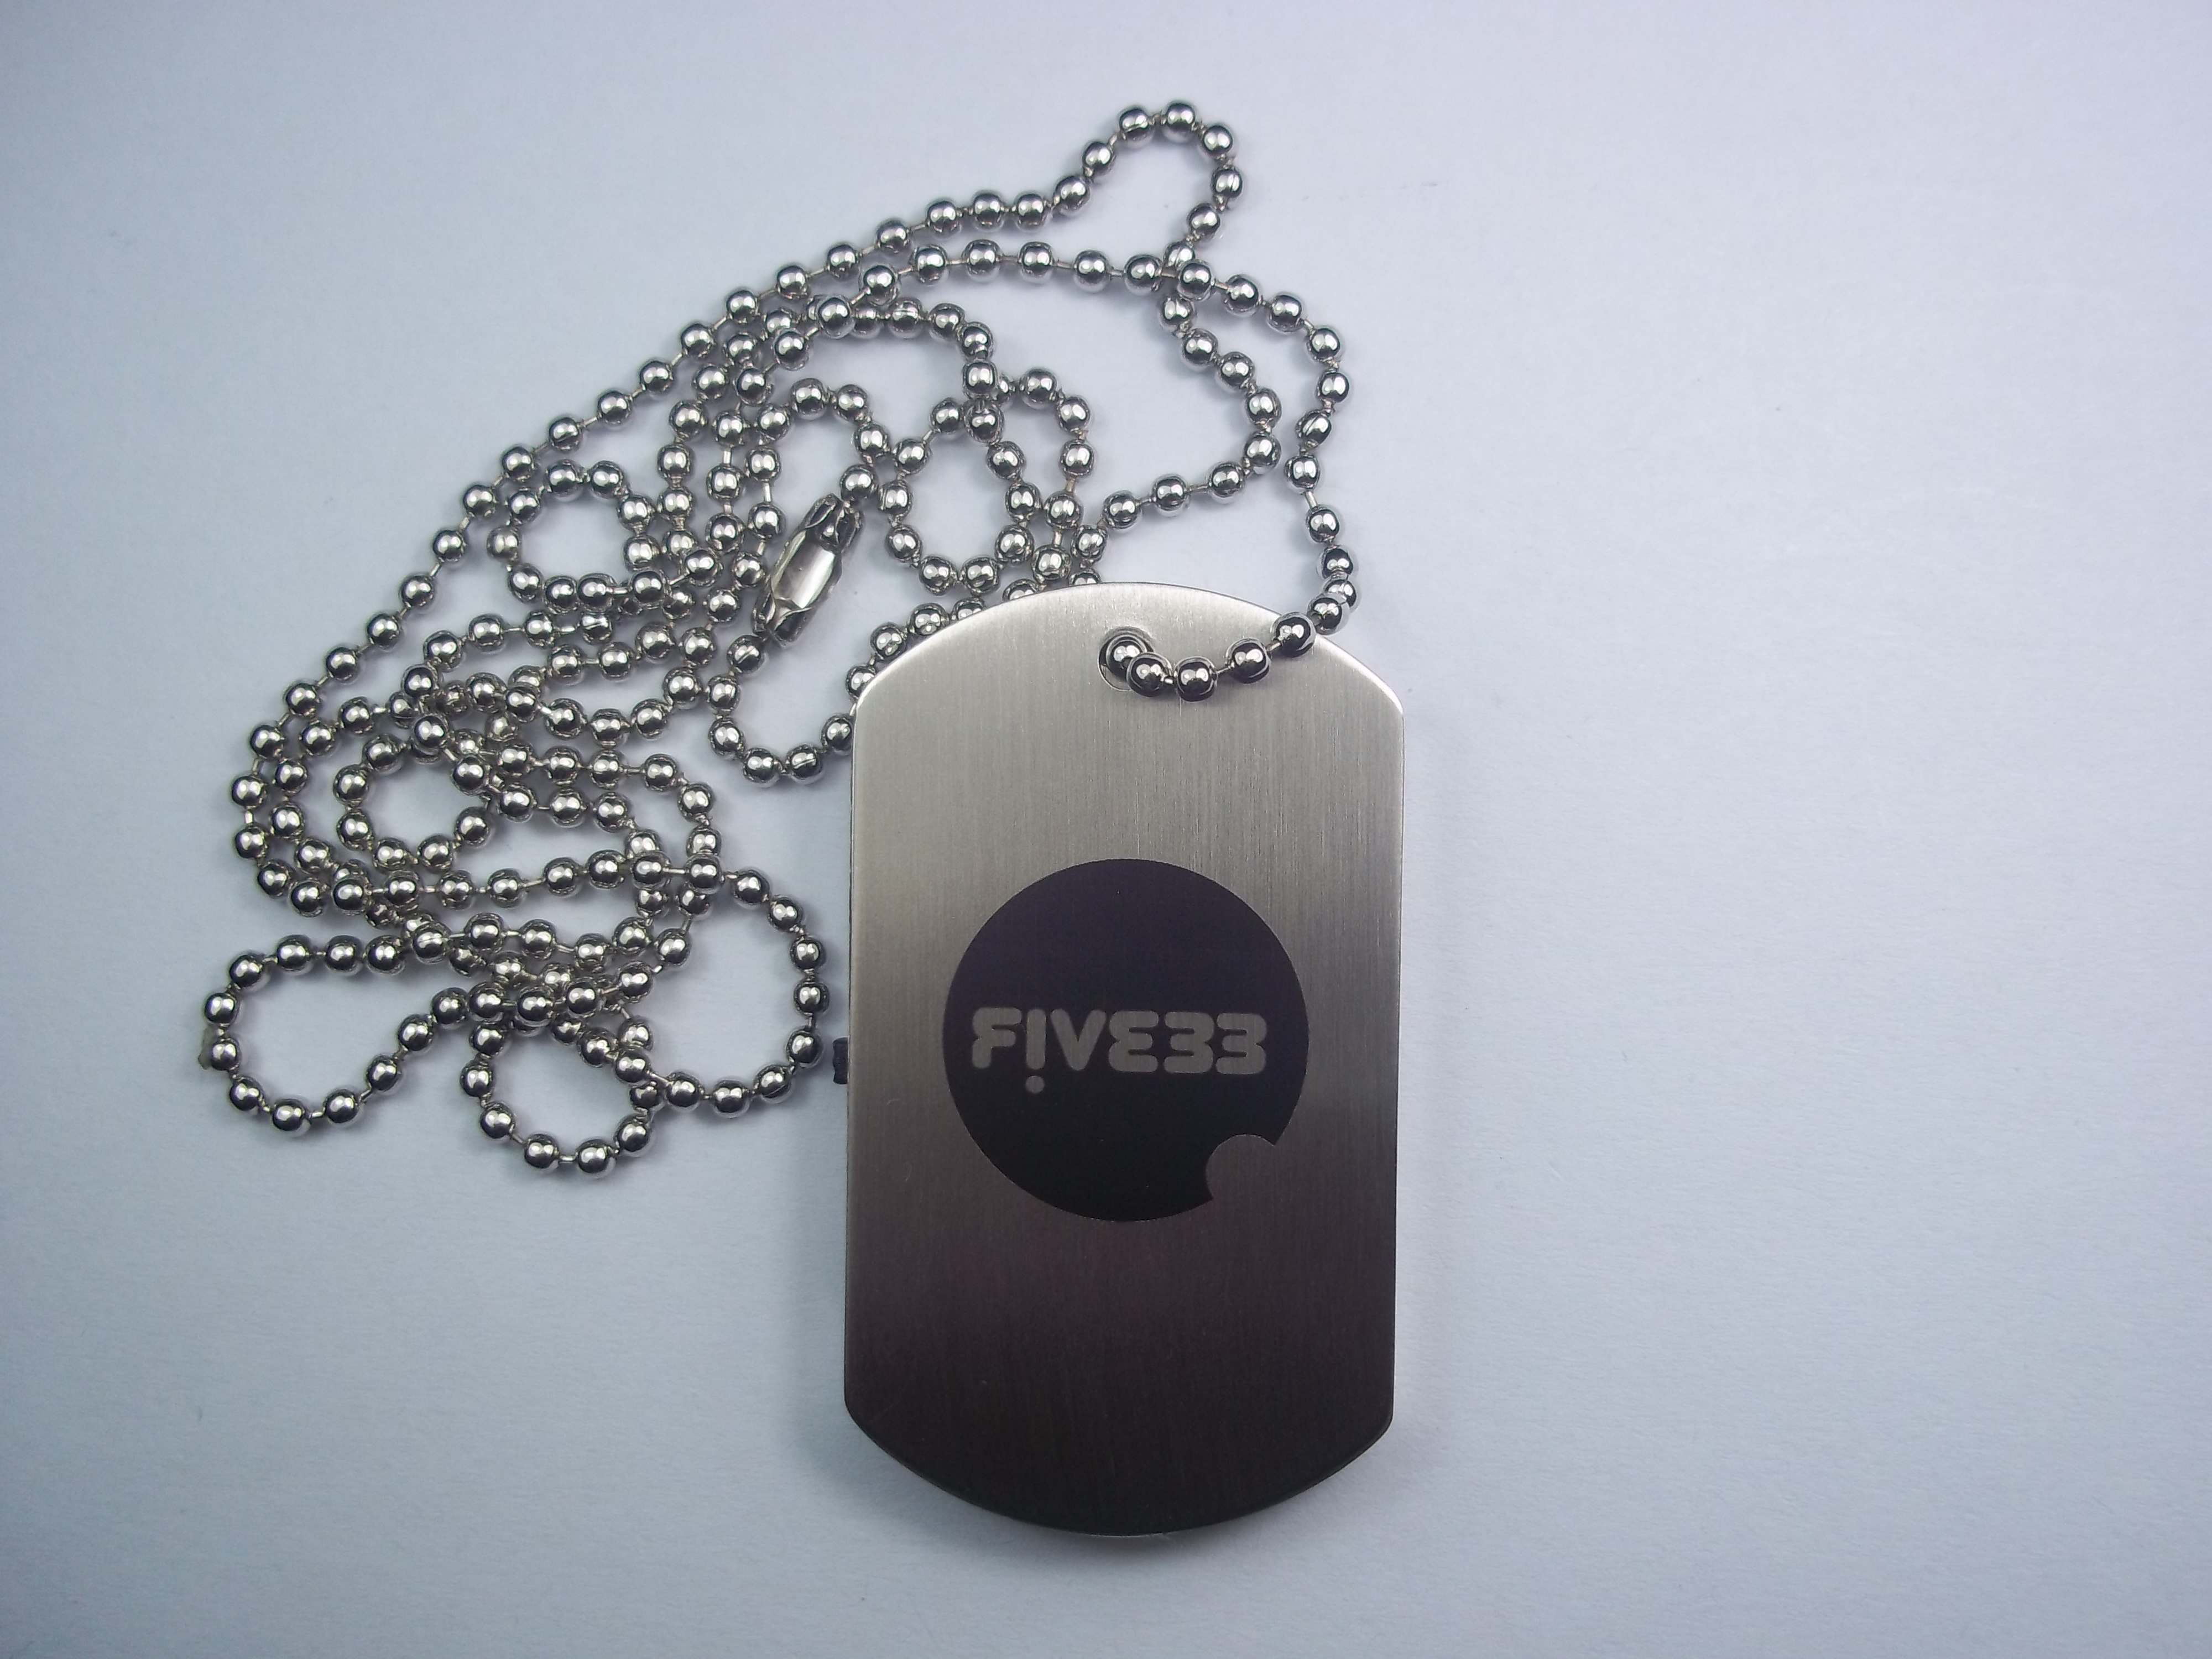 Five33 Dogtag